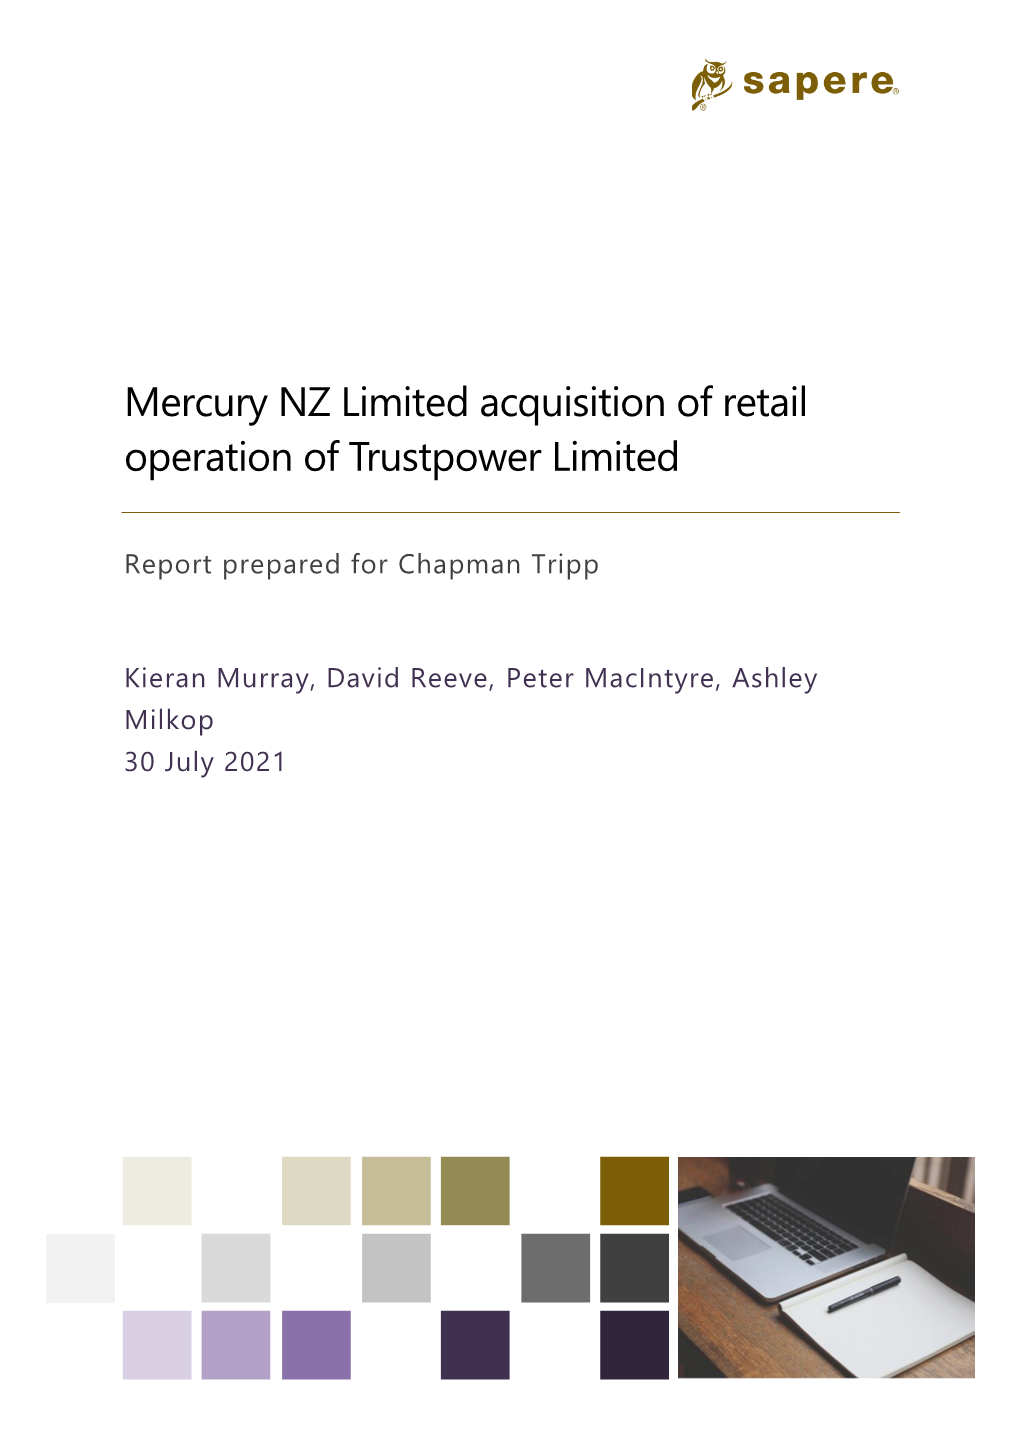 Mercury NZ Limited Acquisition of Retail Operation of Trustpower Limited